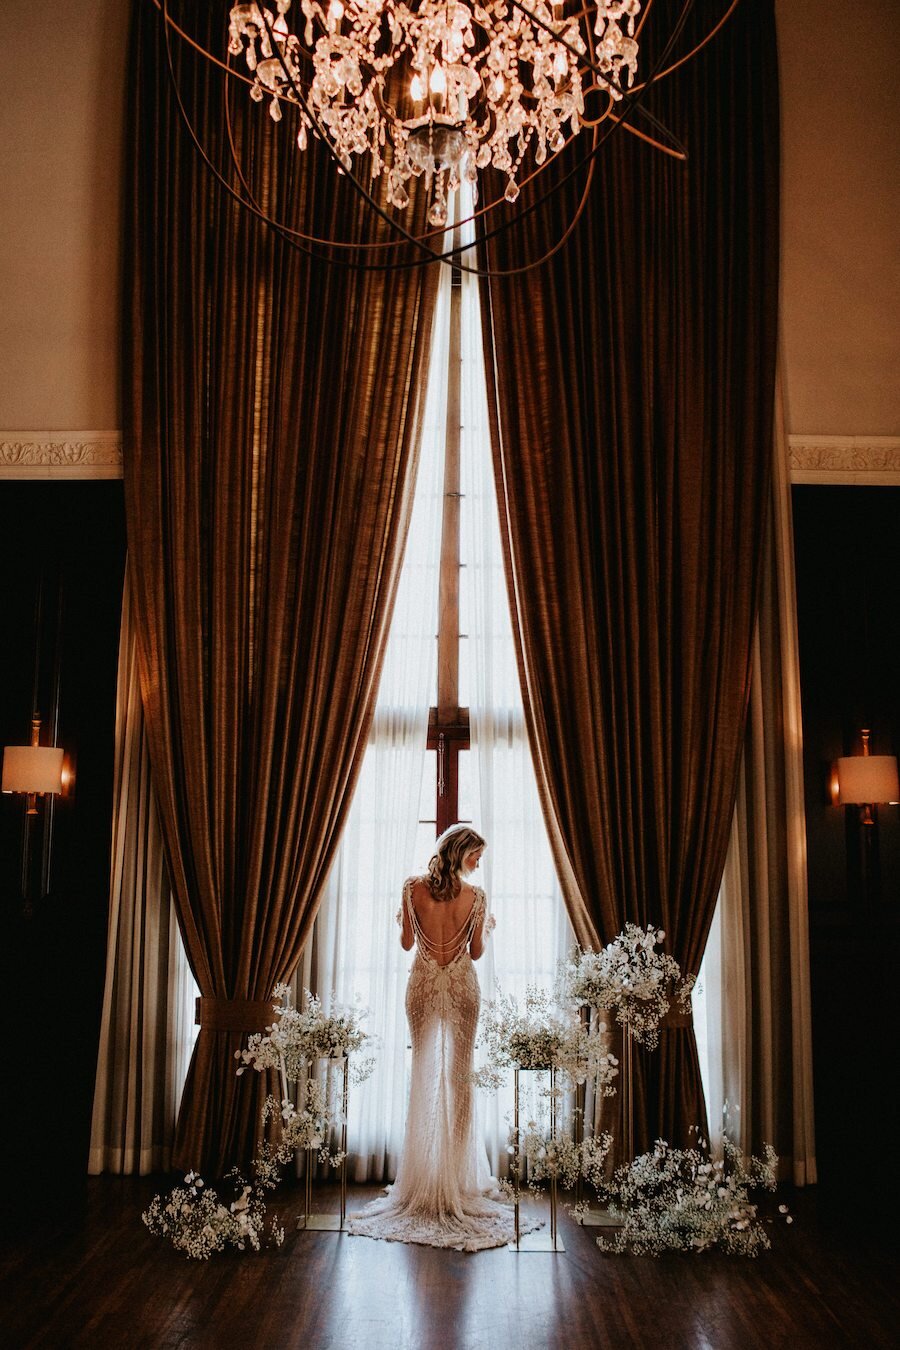 Ethereal EBell Long Beach Wedding Inspiration Featured on 100 Layer Cake6.jpg